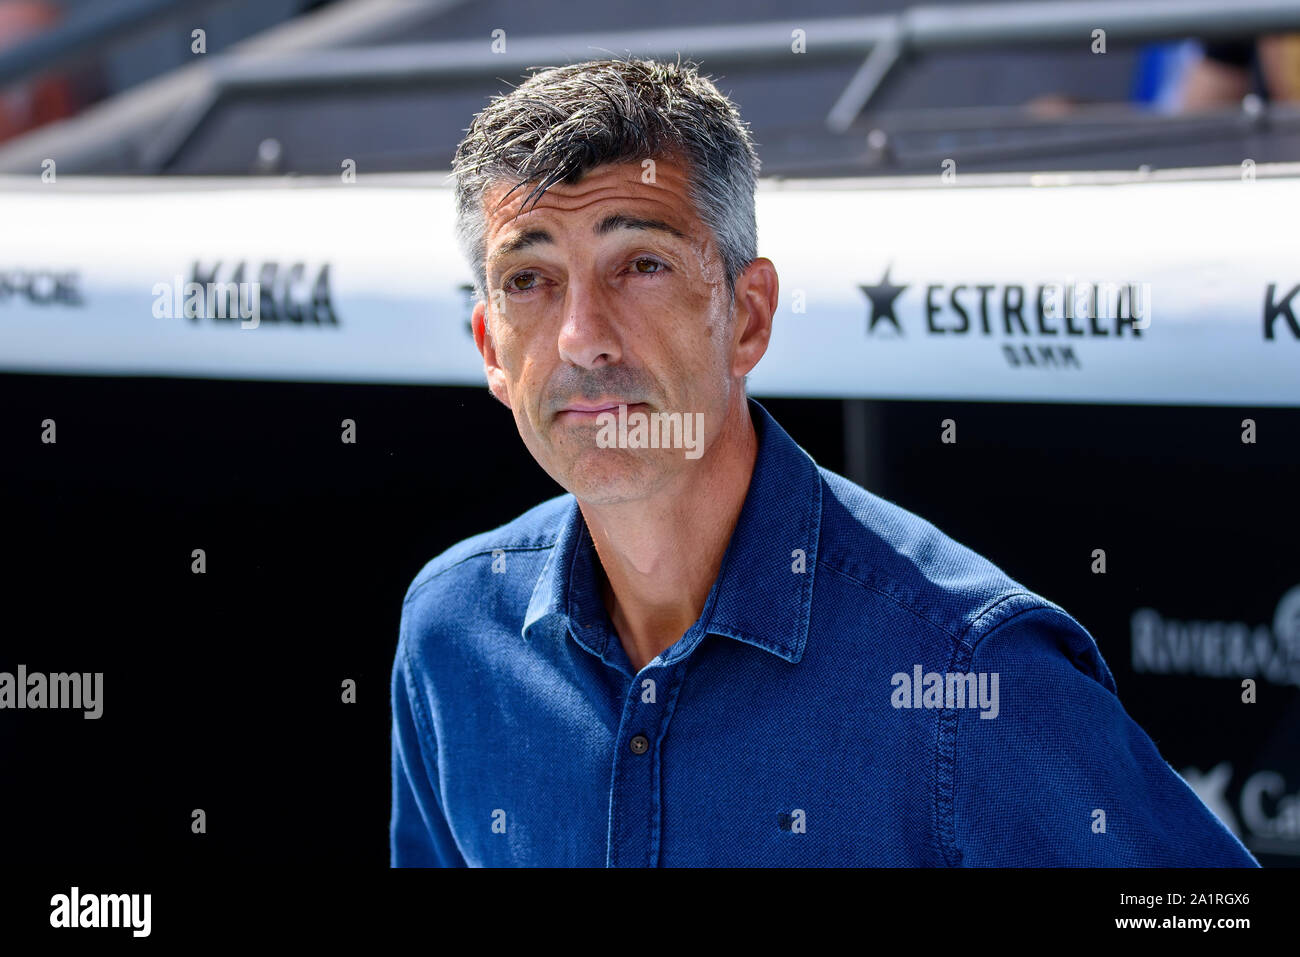 BARCELONA - SEP 22: The coach Imanol Alguacil at the La Liga match between RCD Espanyol and Real Sociedad at the RCDE Stadium on September 22, 2019 in Stock Photo